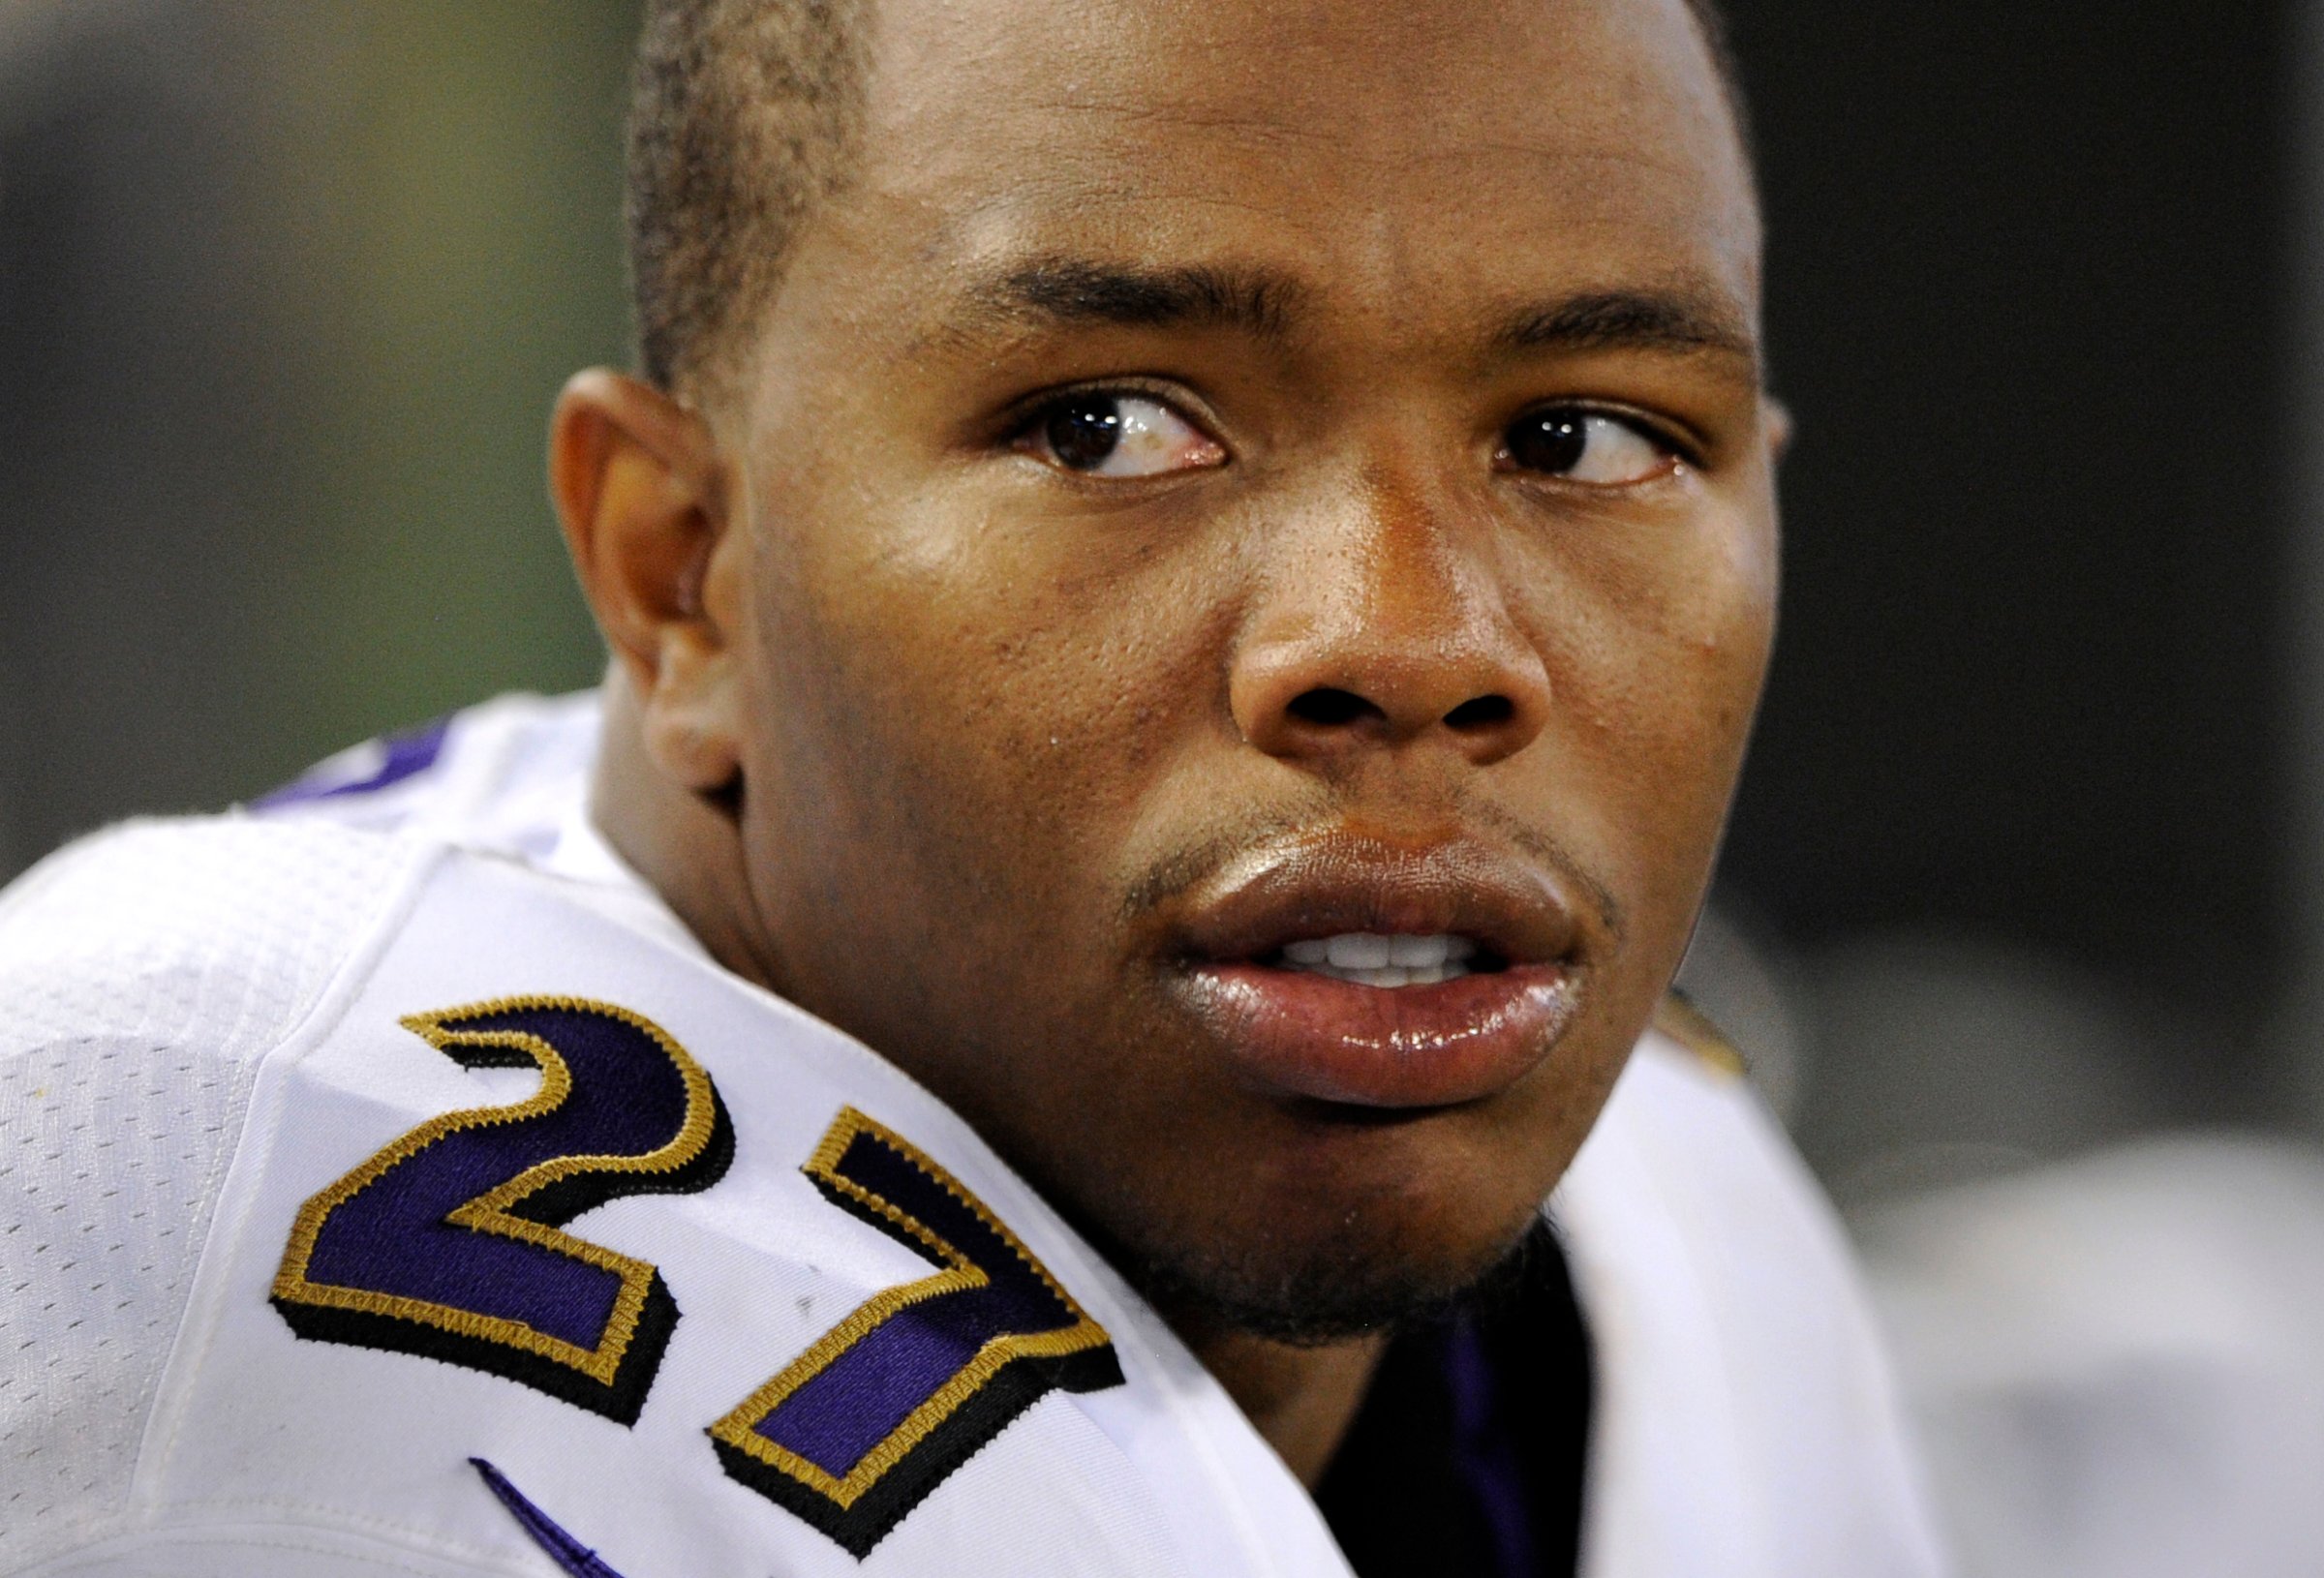 Baltimore Ravens running back Ray Rice sits on the sideline in the first half of an NFL preseason football game against the San Francisco 49ers on Aug. 7, 2014, in Baltimore.